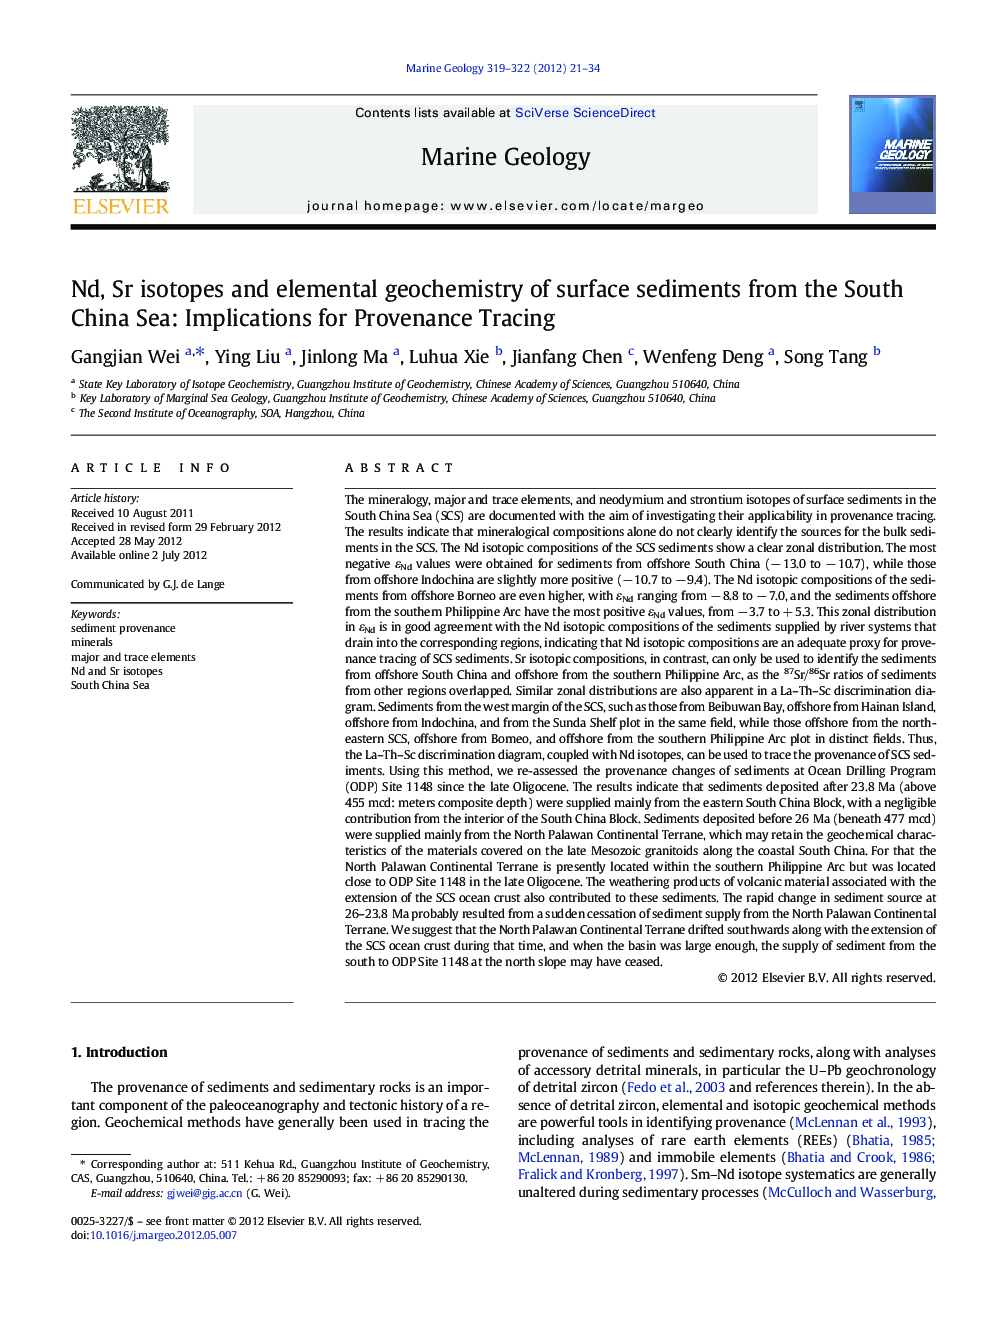 Nd, Sr isotopes and elemental geochemistry of surface sediments from the South China Sea: Implications for Provenance Tracing